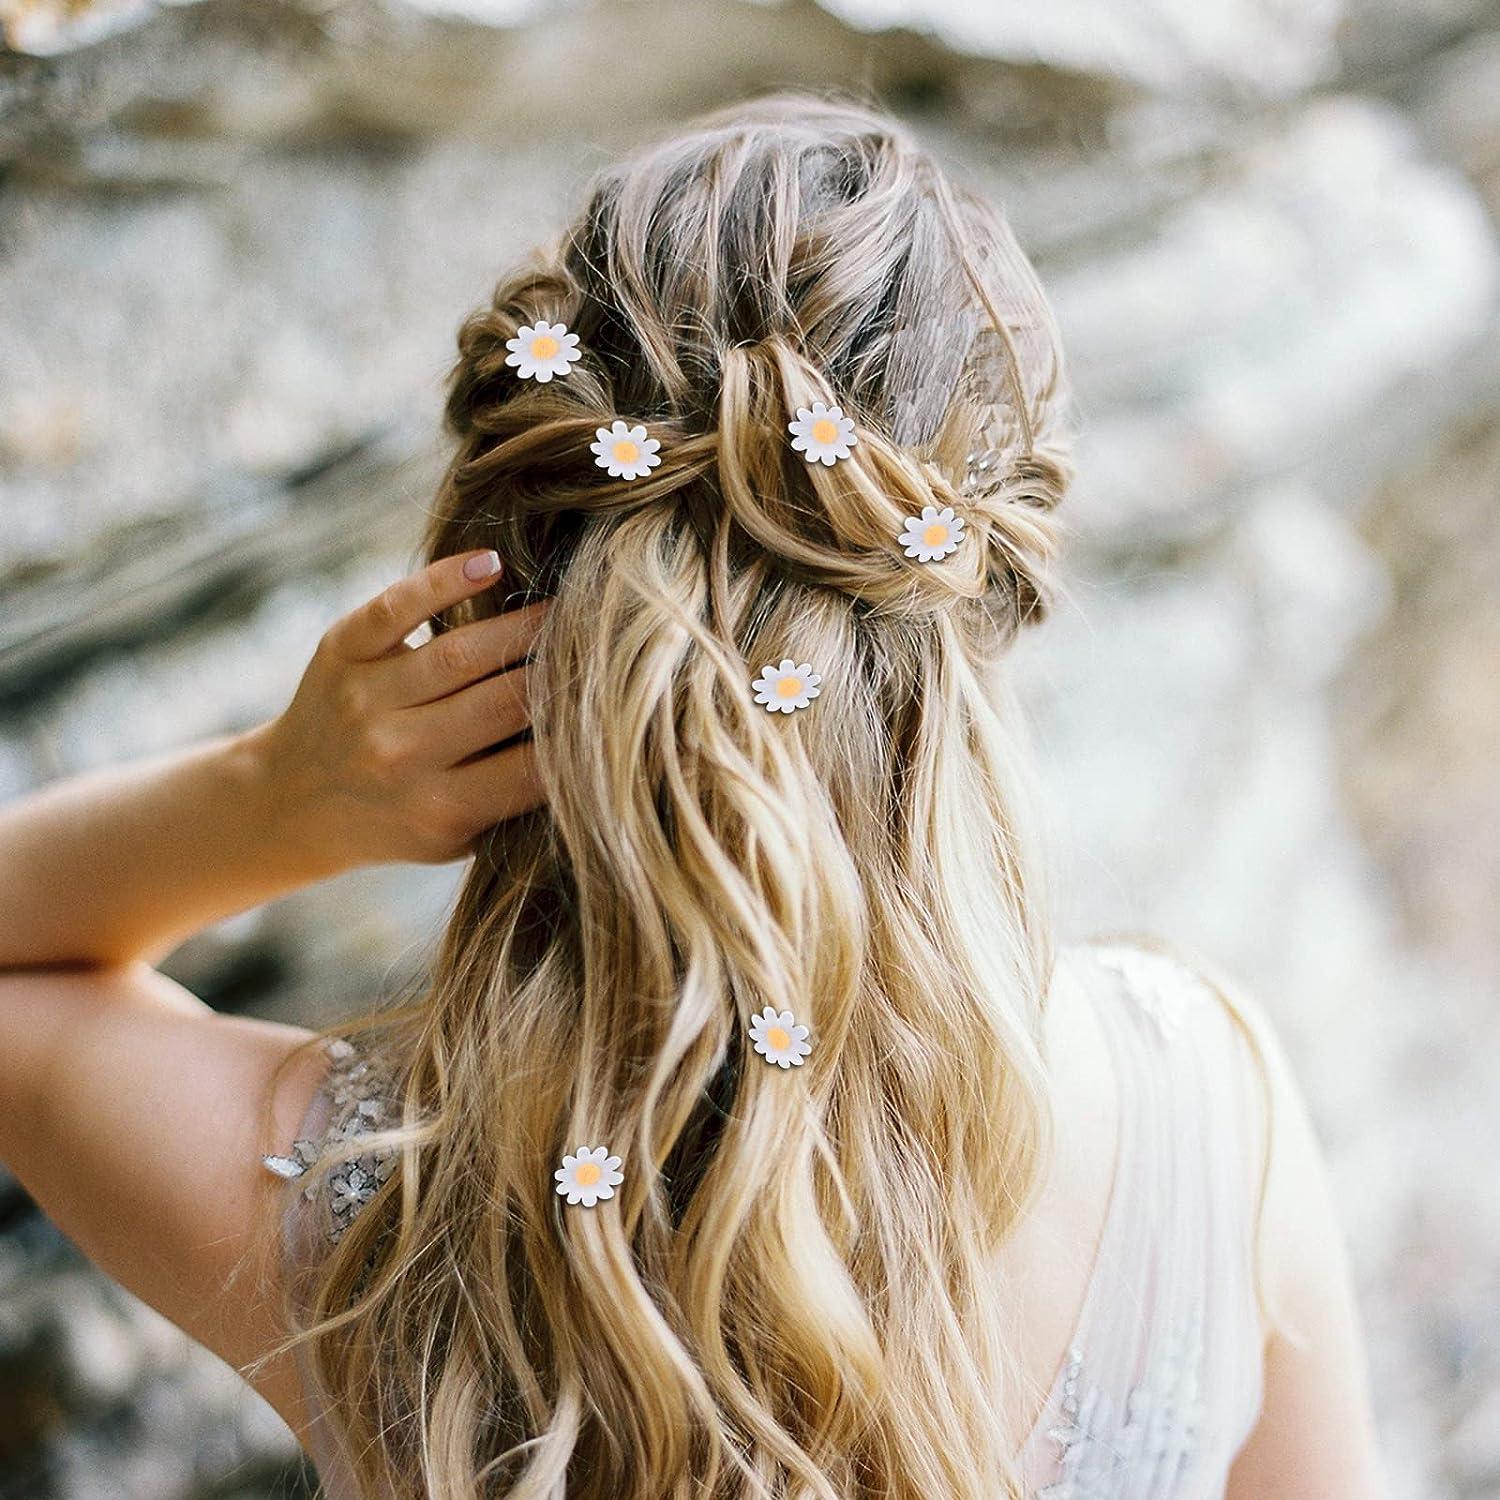 5 Best Hairstyles Using Hair Accessories For Short Hair – Summer Crystal